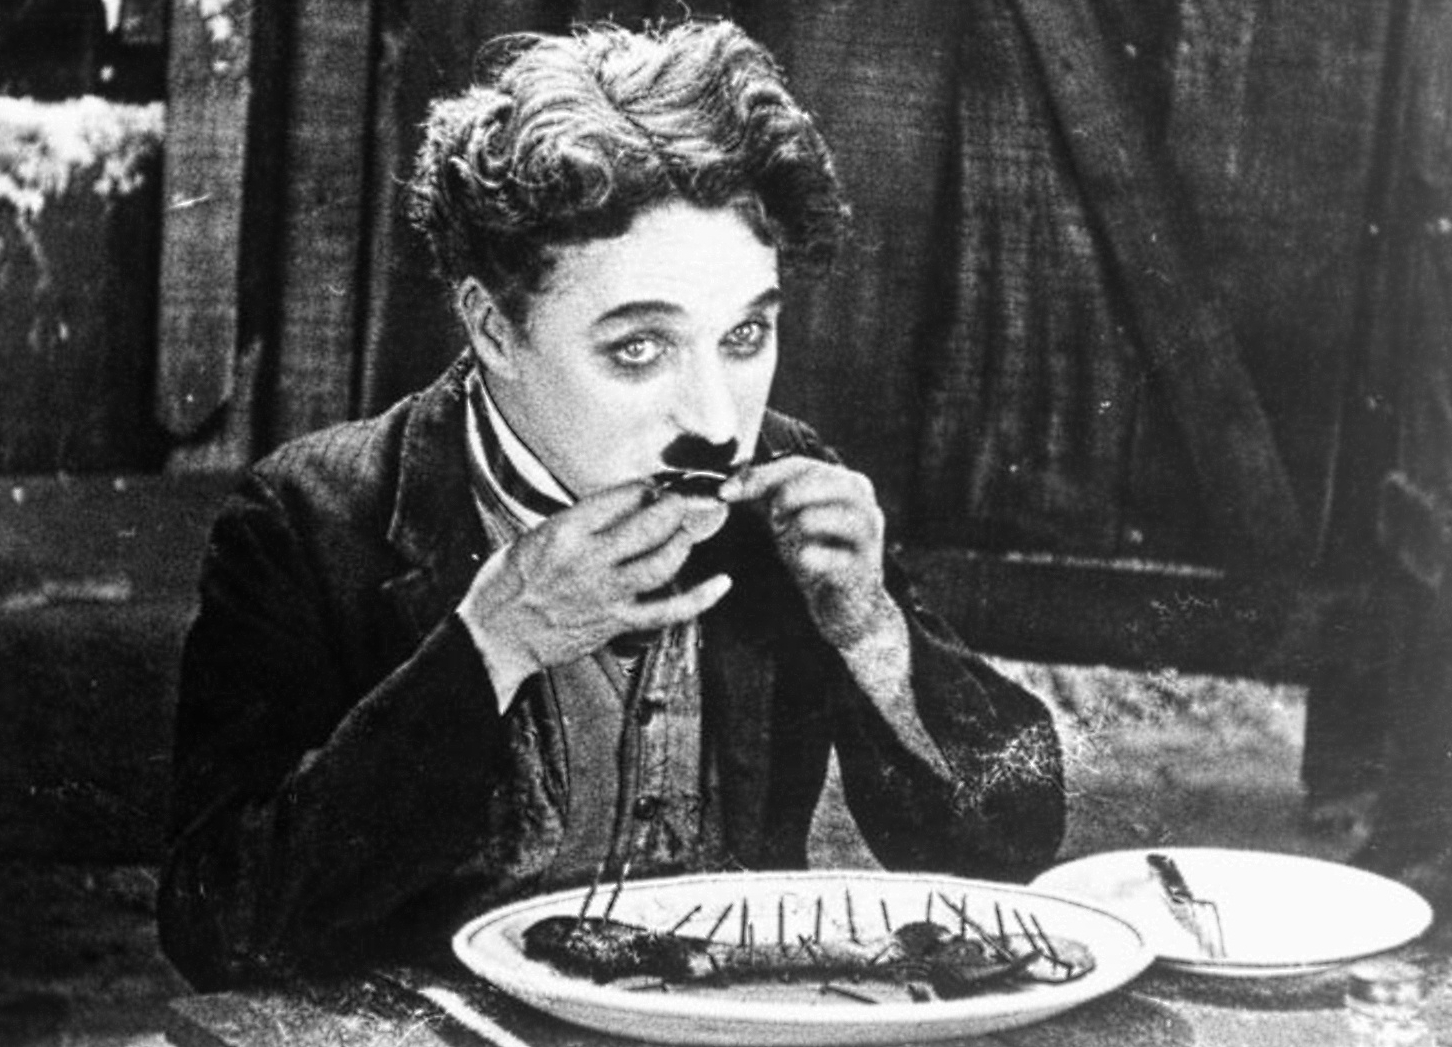 Charlie Chaplin with a mustache